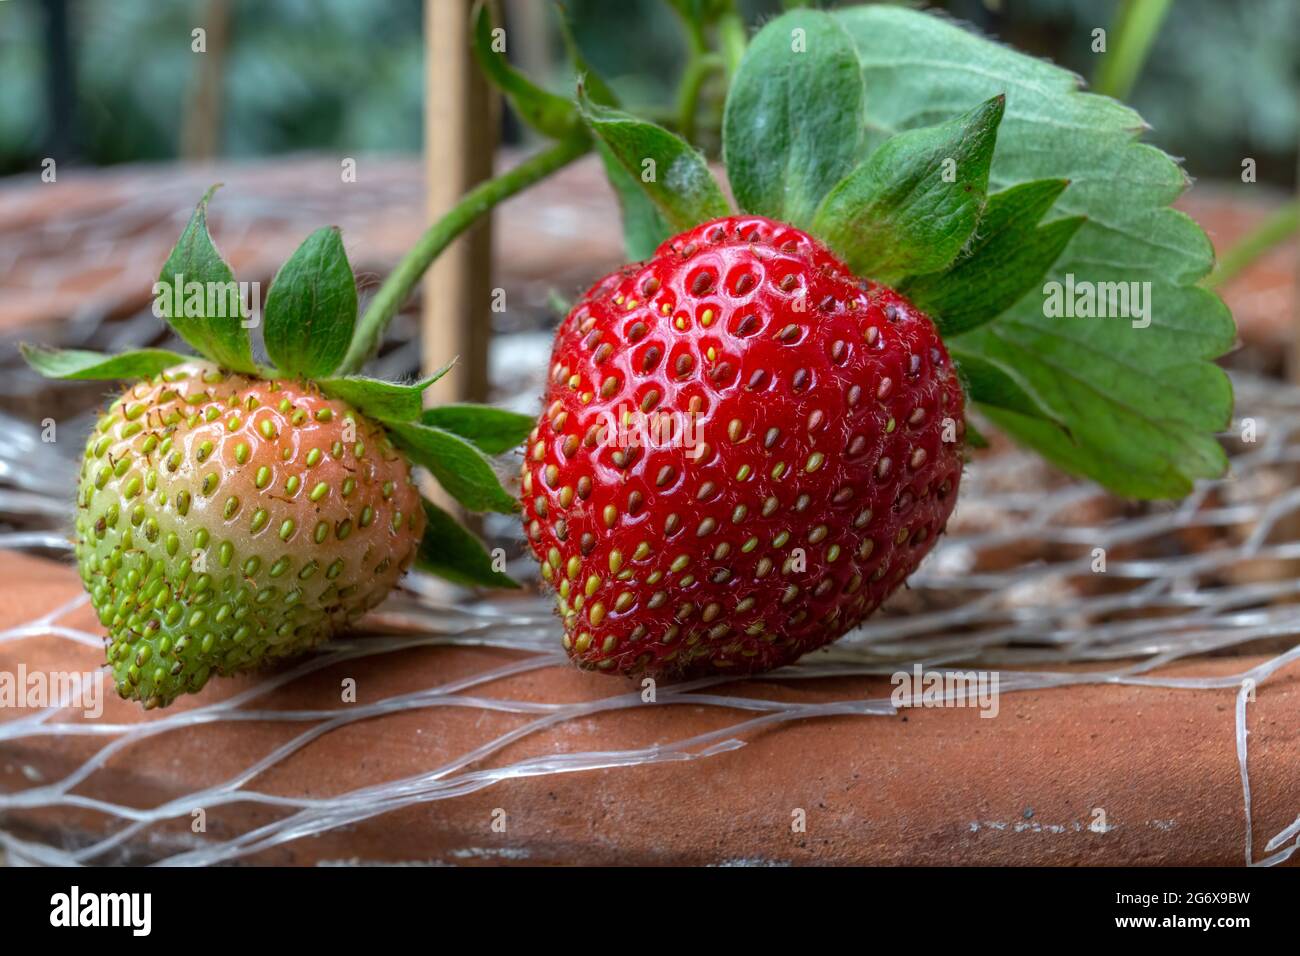 Strawberry branches. Macro view of green and red organic strawberry plant - Fragaria Ananassa - fruits with significant seeds in an earth pot. Stock Photo